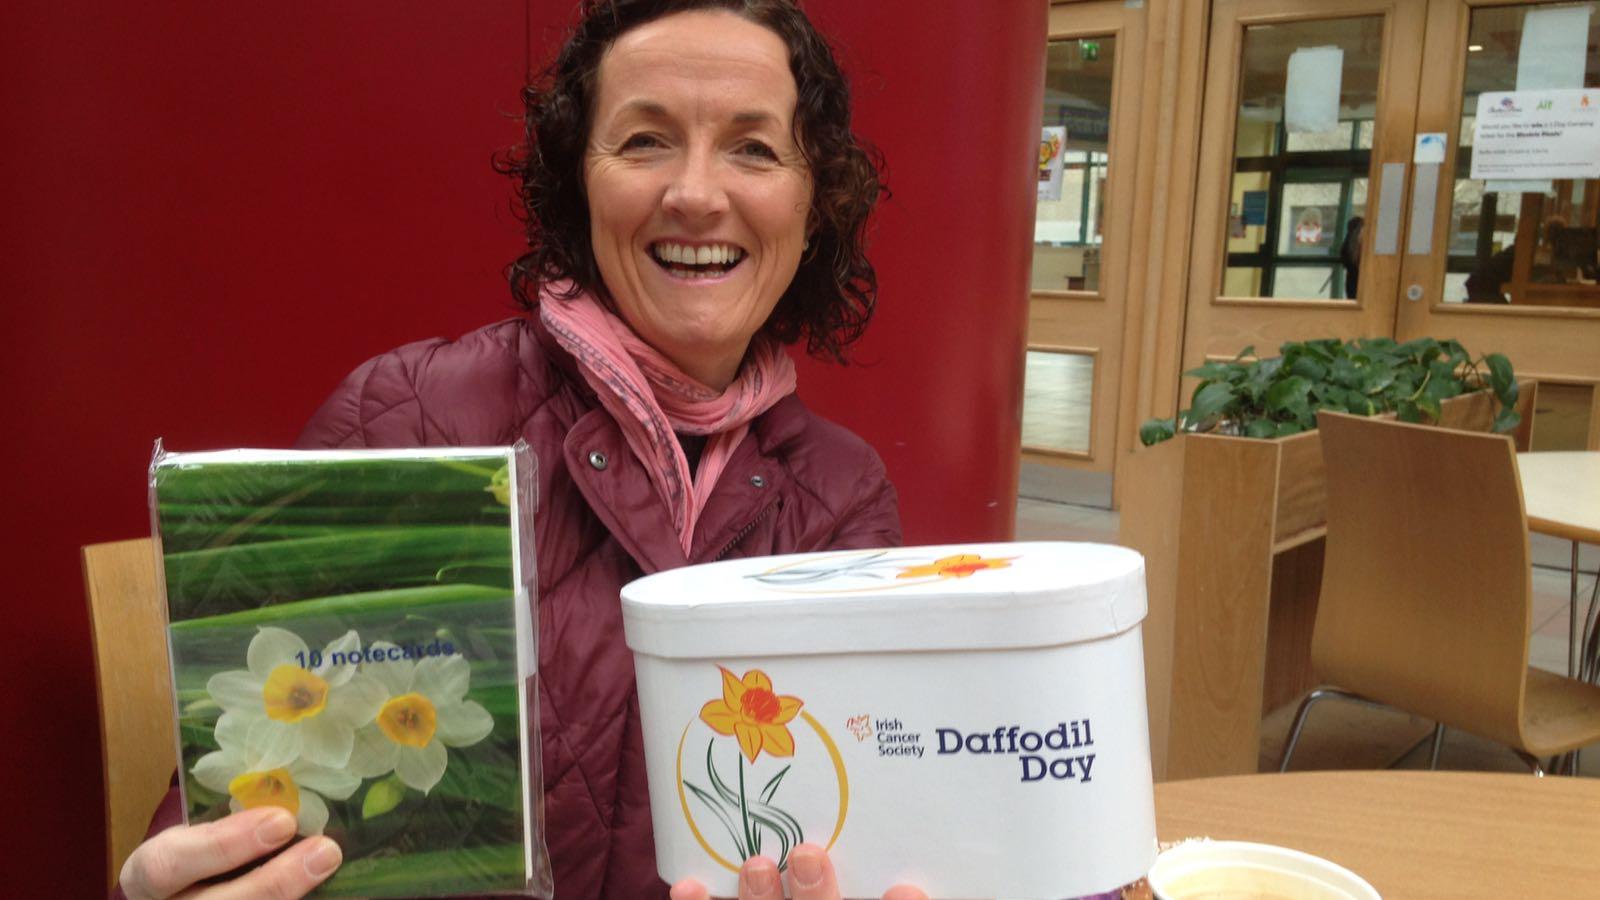 Daffodil Day coffee morning at AIT